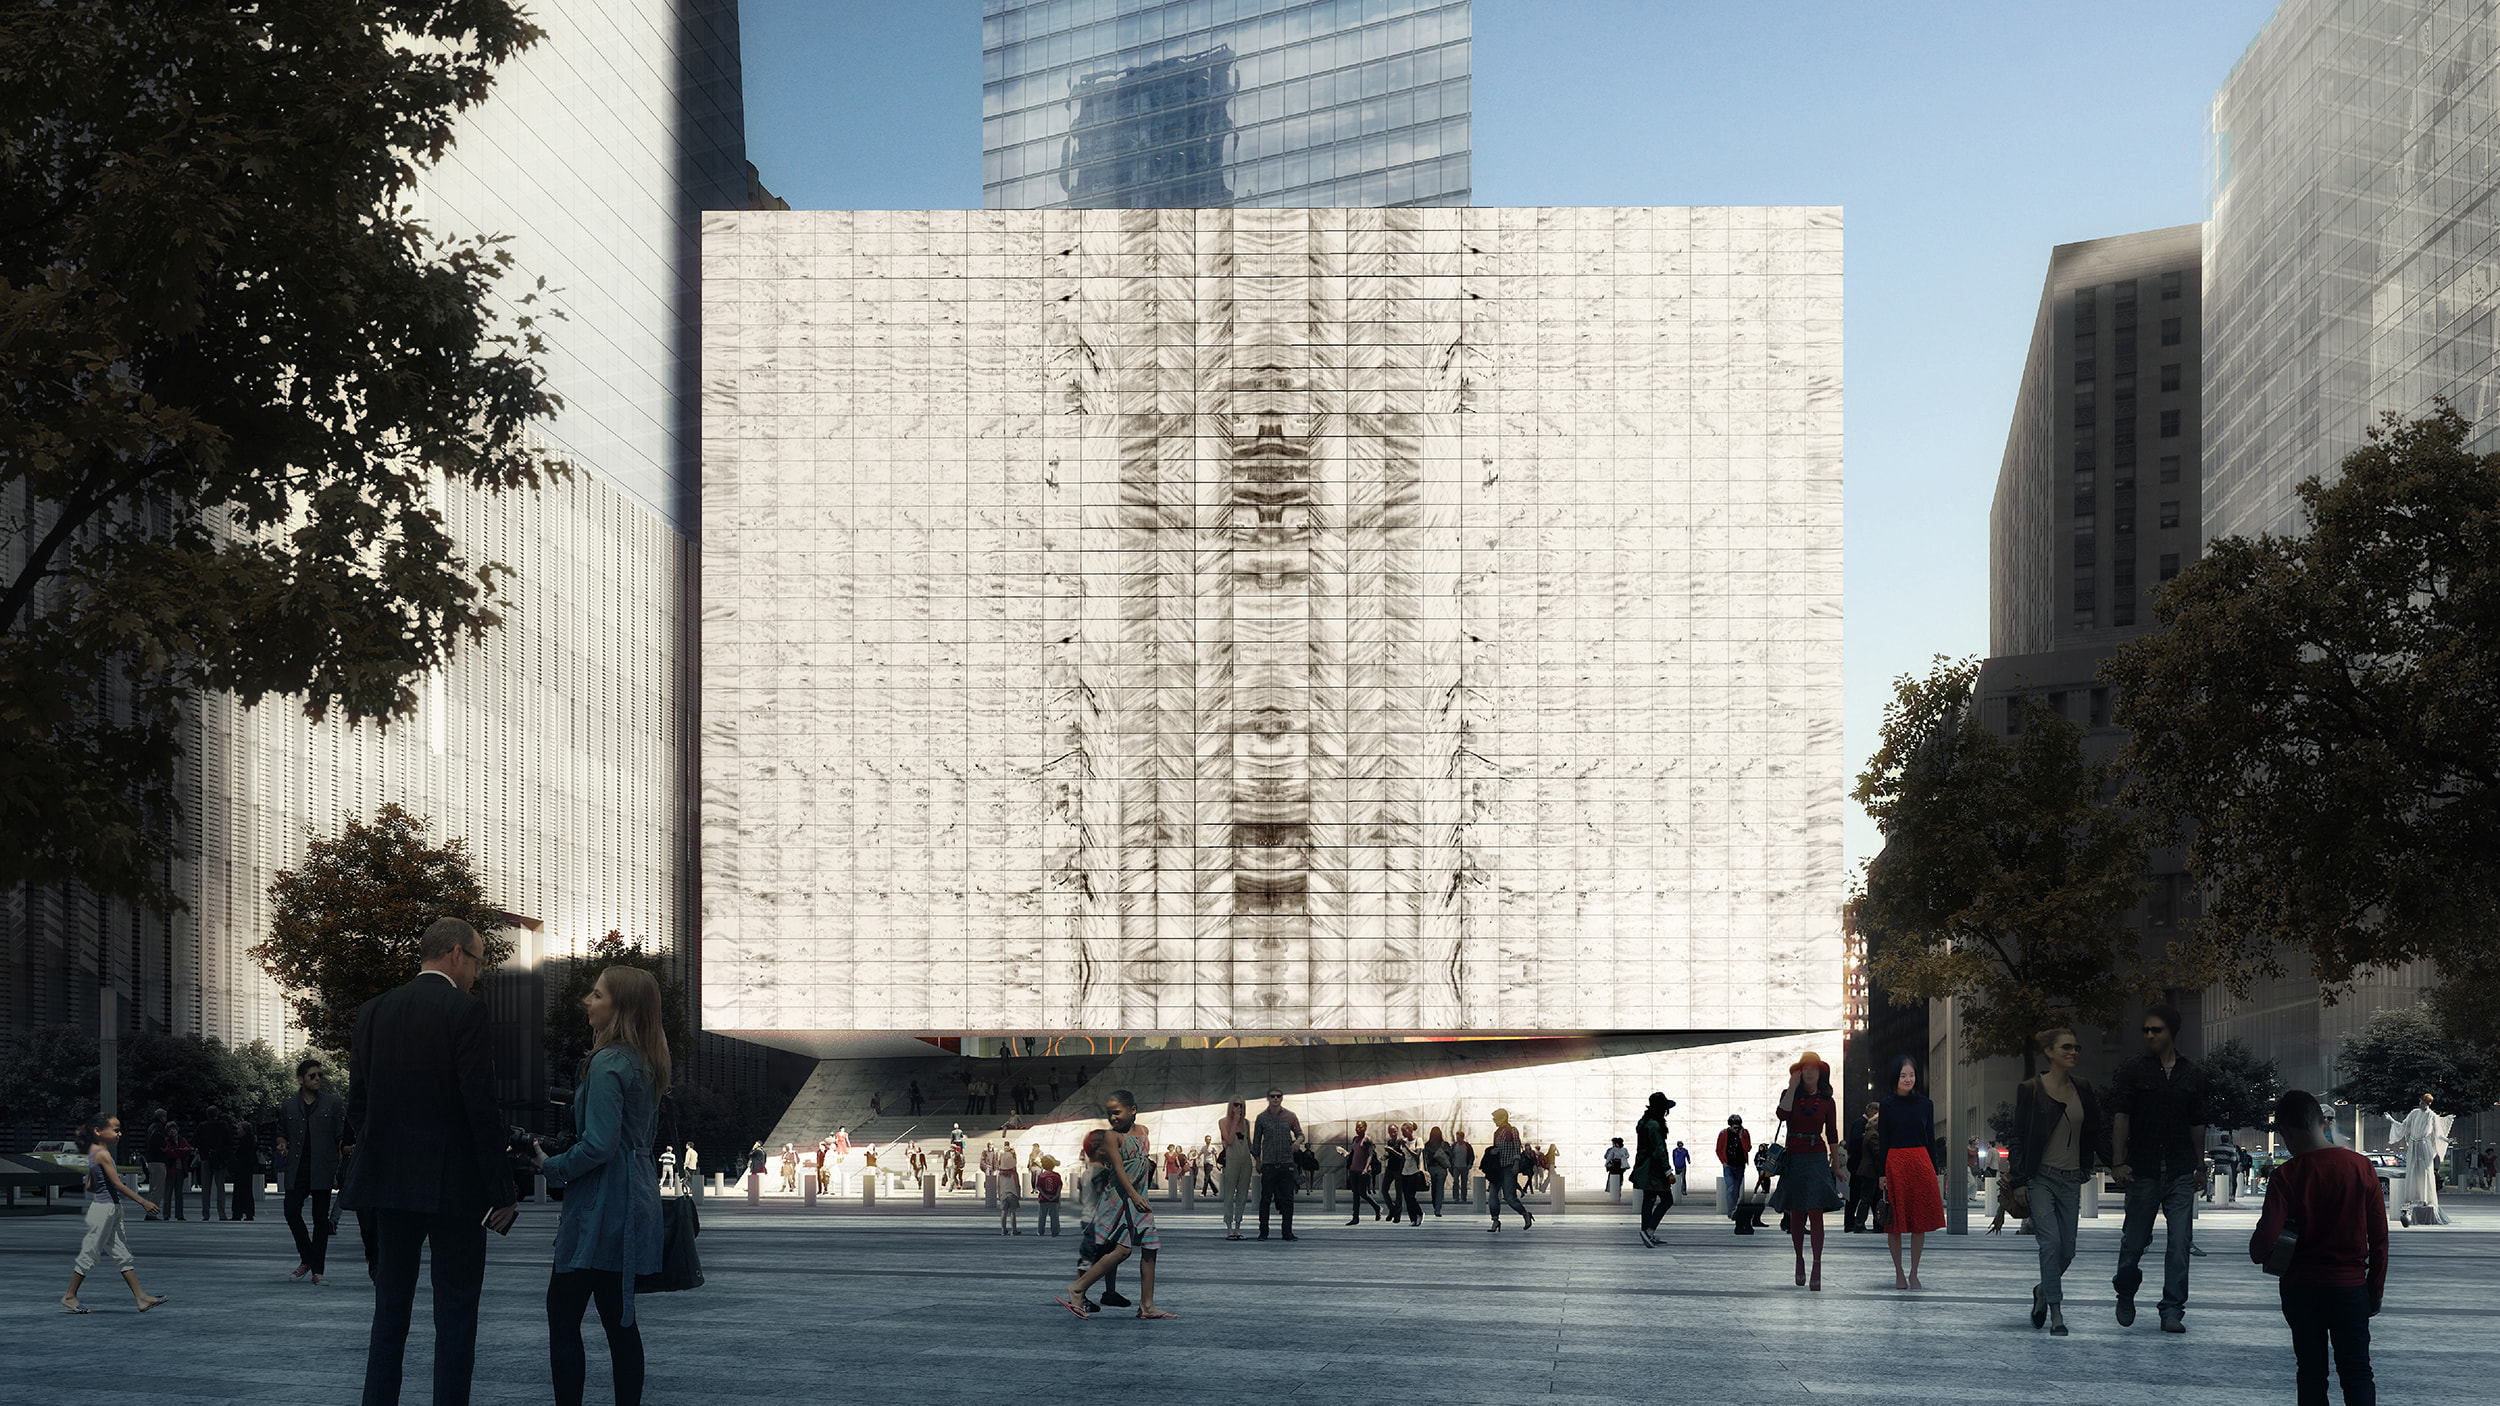 A visualization of The Perelman Performing Arts Center at the World Trade Center.